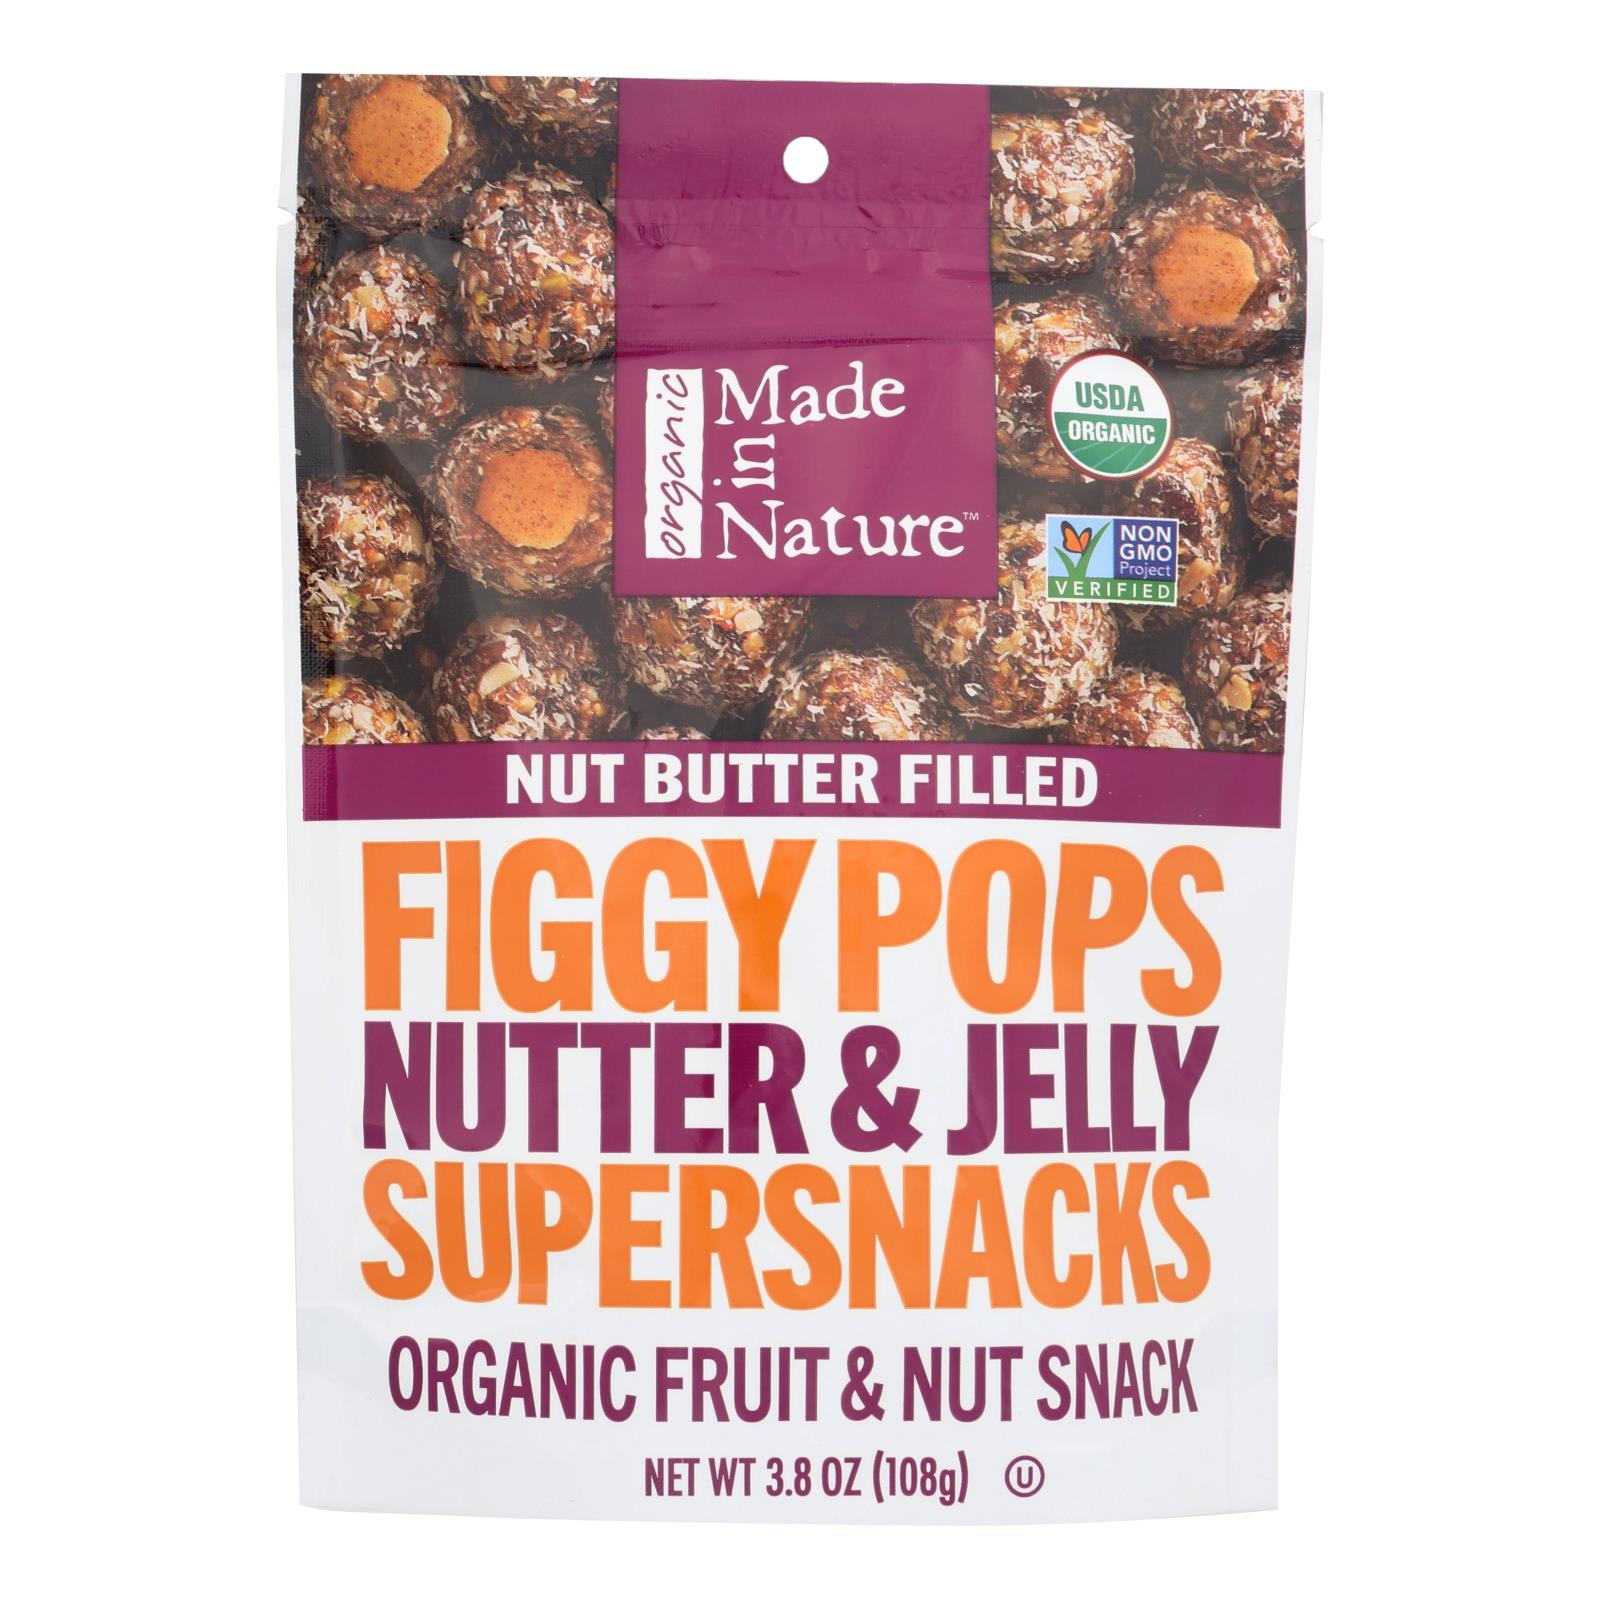 Made In Nature Organic Figgy Pops Nutter & Jelly Supersnacks - 6개 묶음상품 - 3.8 OZ